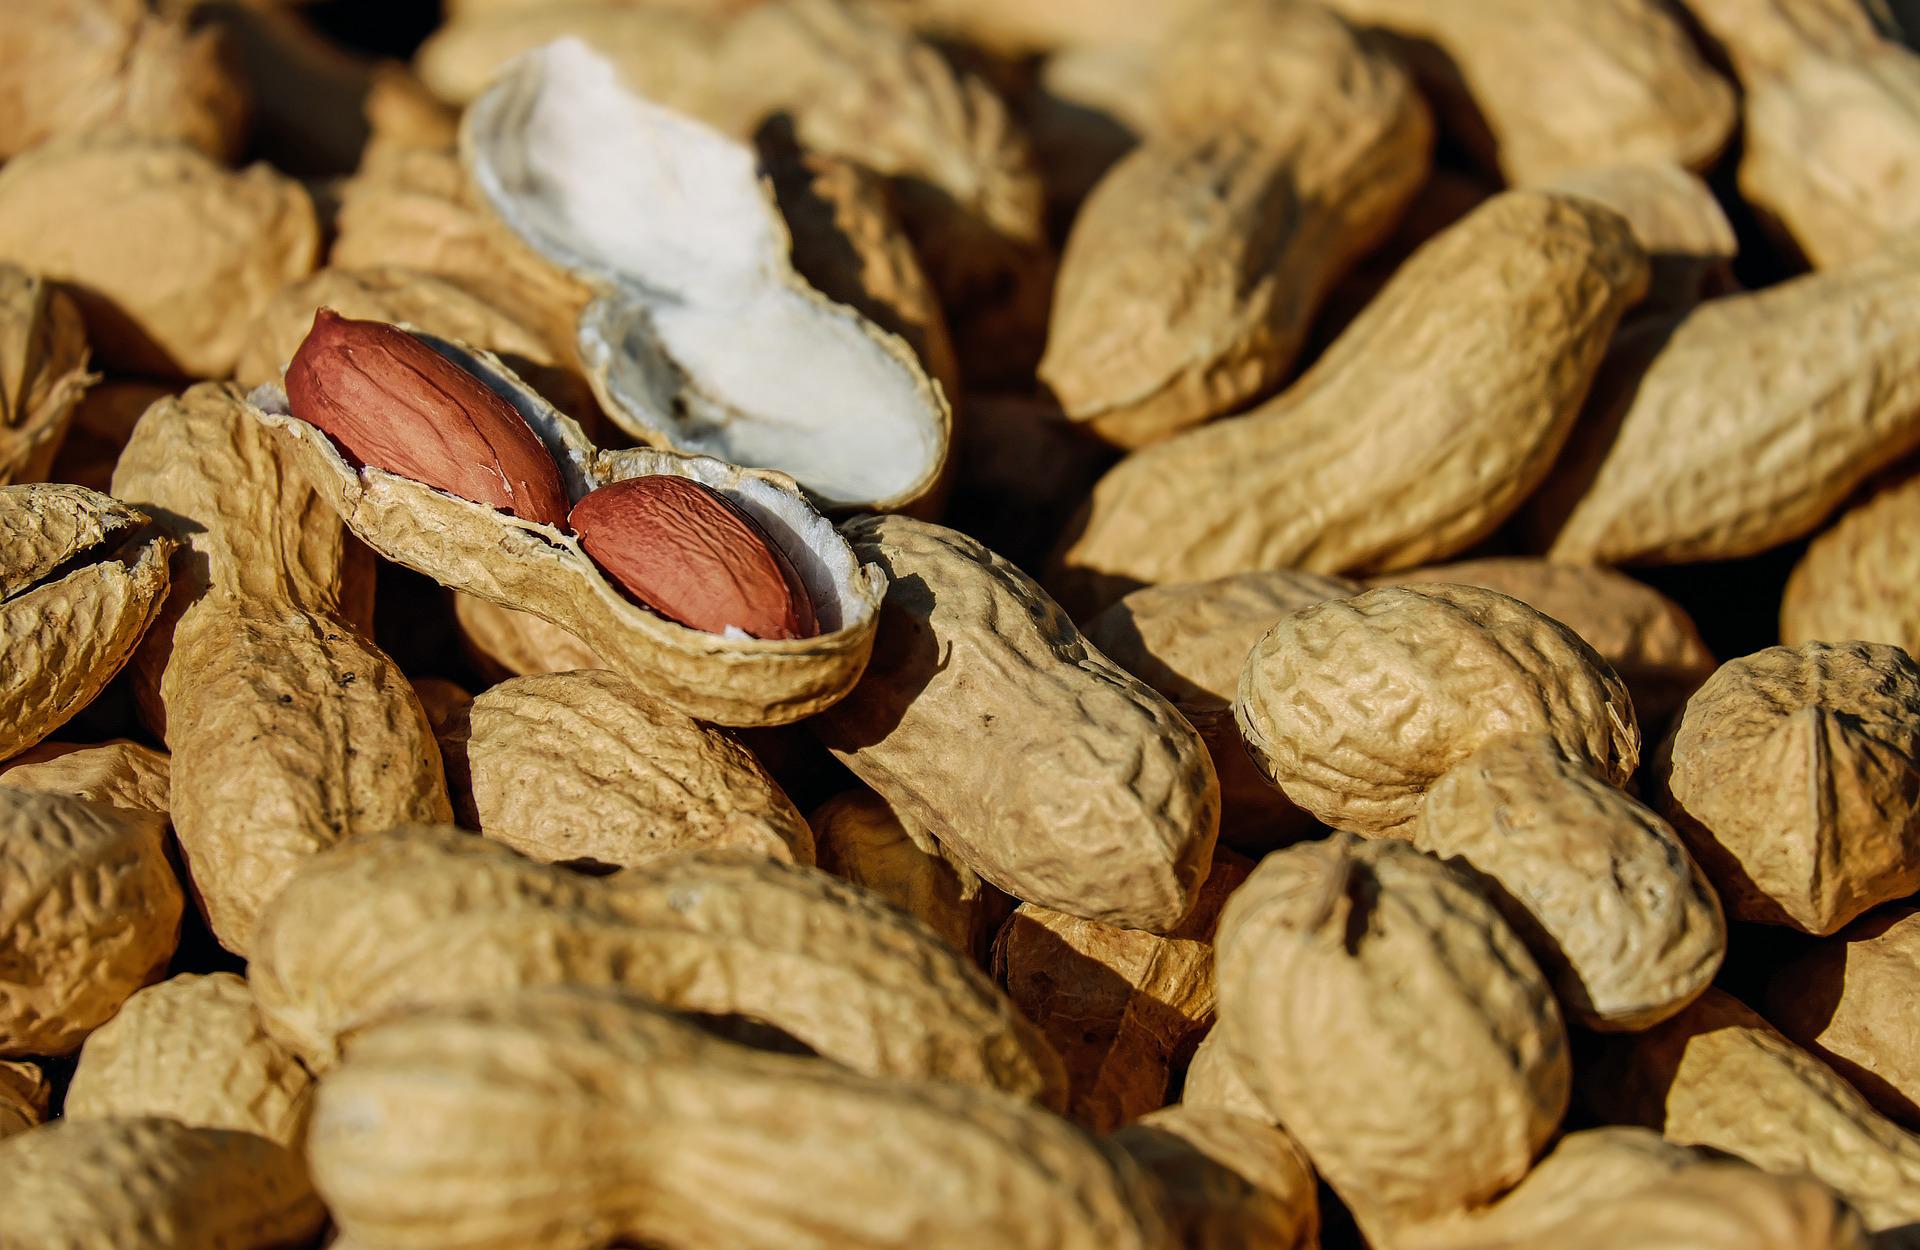 7 Benefits of Eating Peanuts